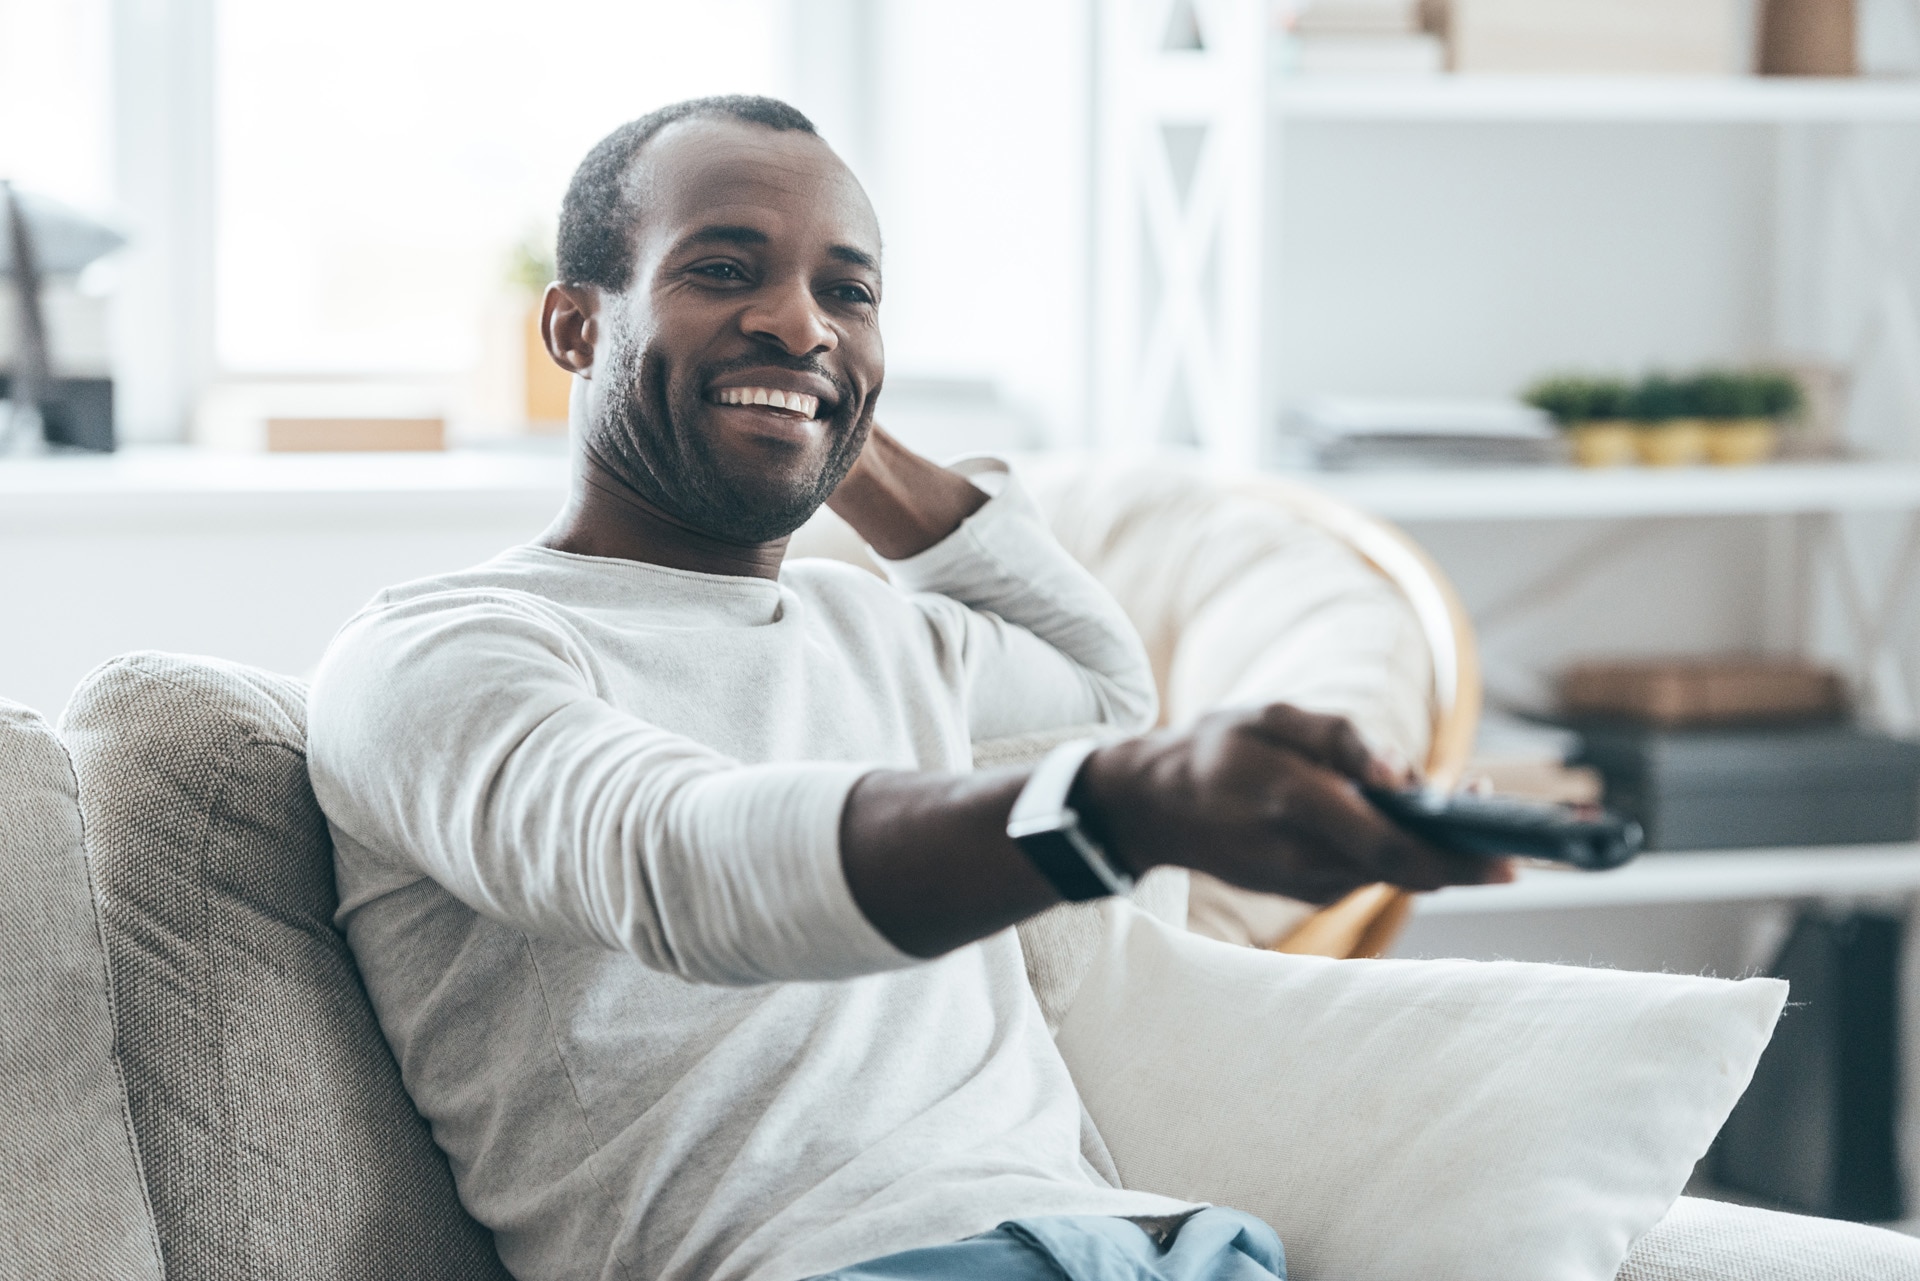 Watching TV at home. Handsome young African man watching TV and smiling while sitting on the sofa at home.